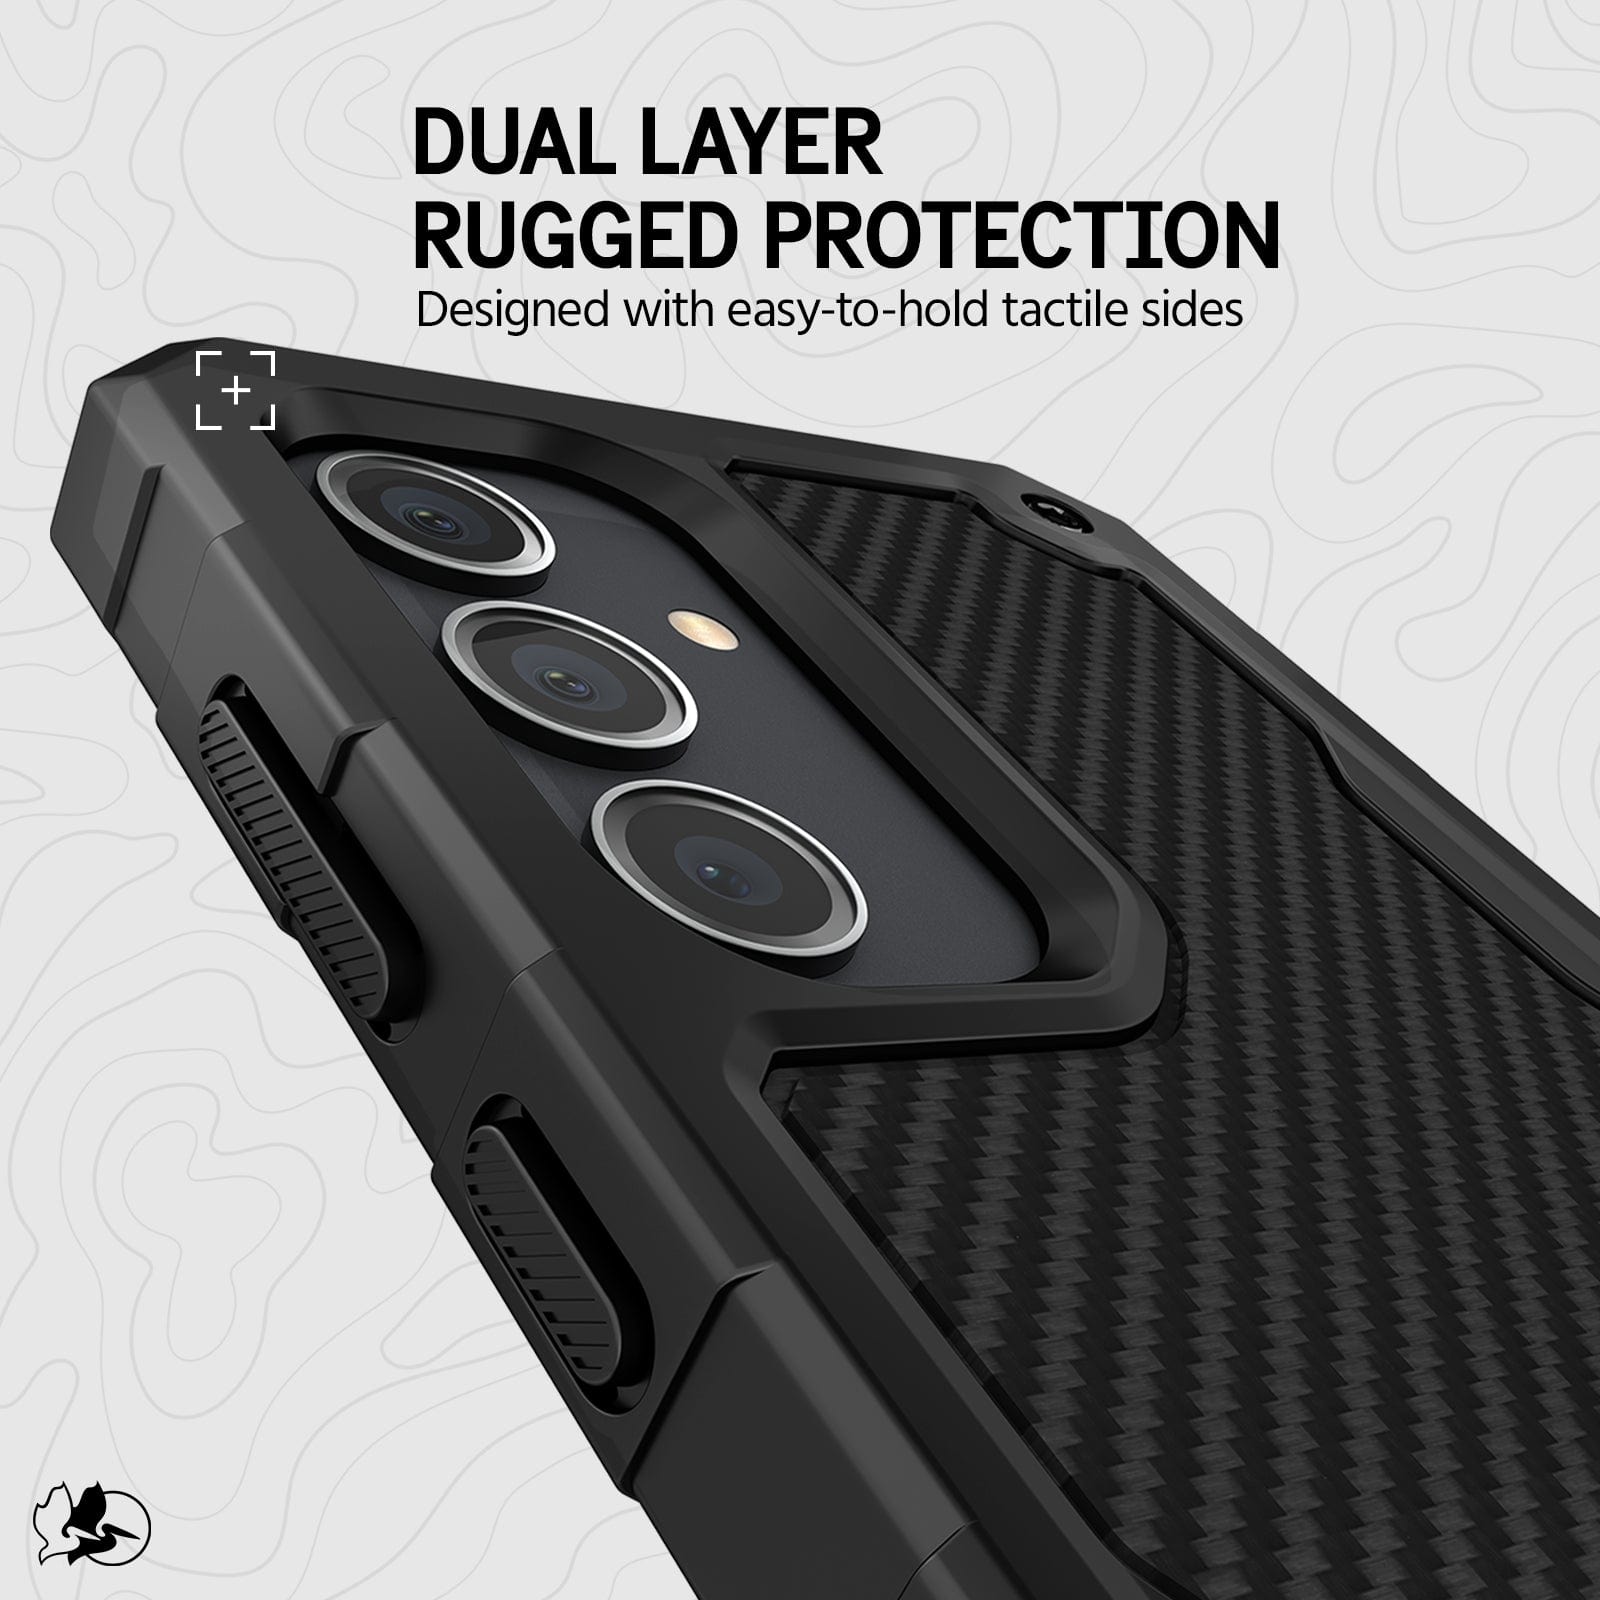 DUAL LAYER RUGGED PROTECTION. DESIGNED WITH EASY-TO-HOLD TACTILE SIDES